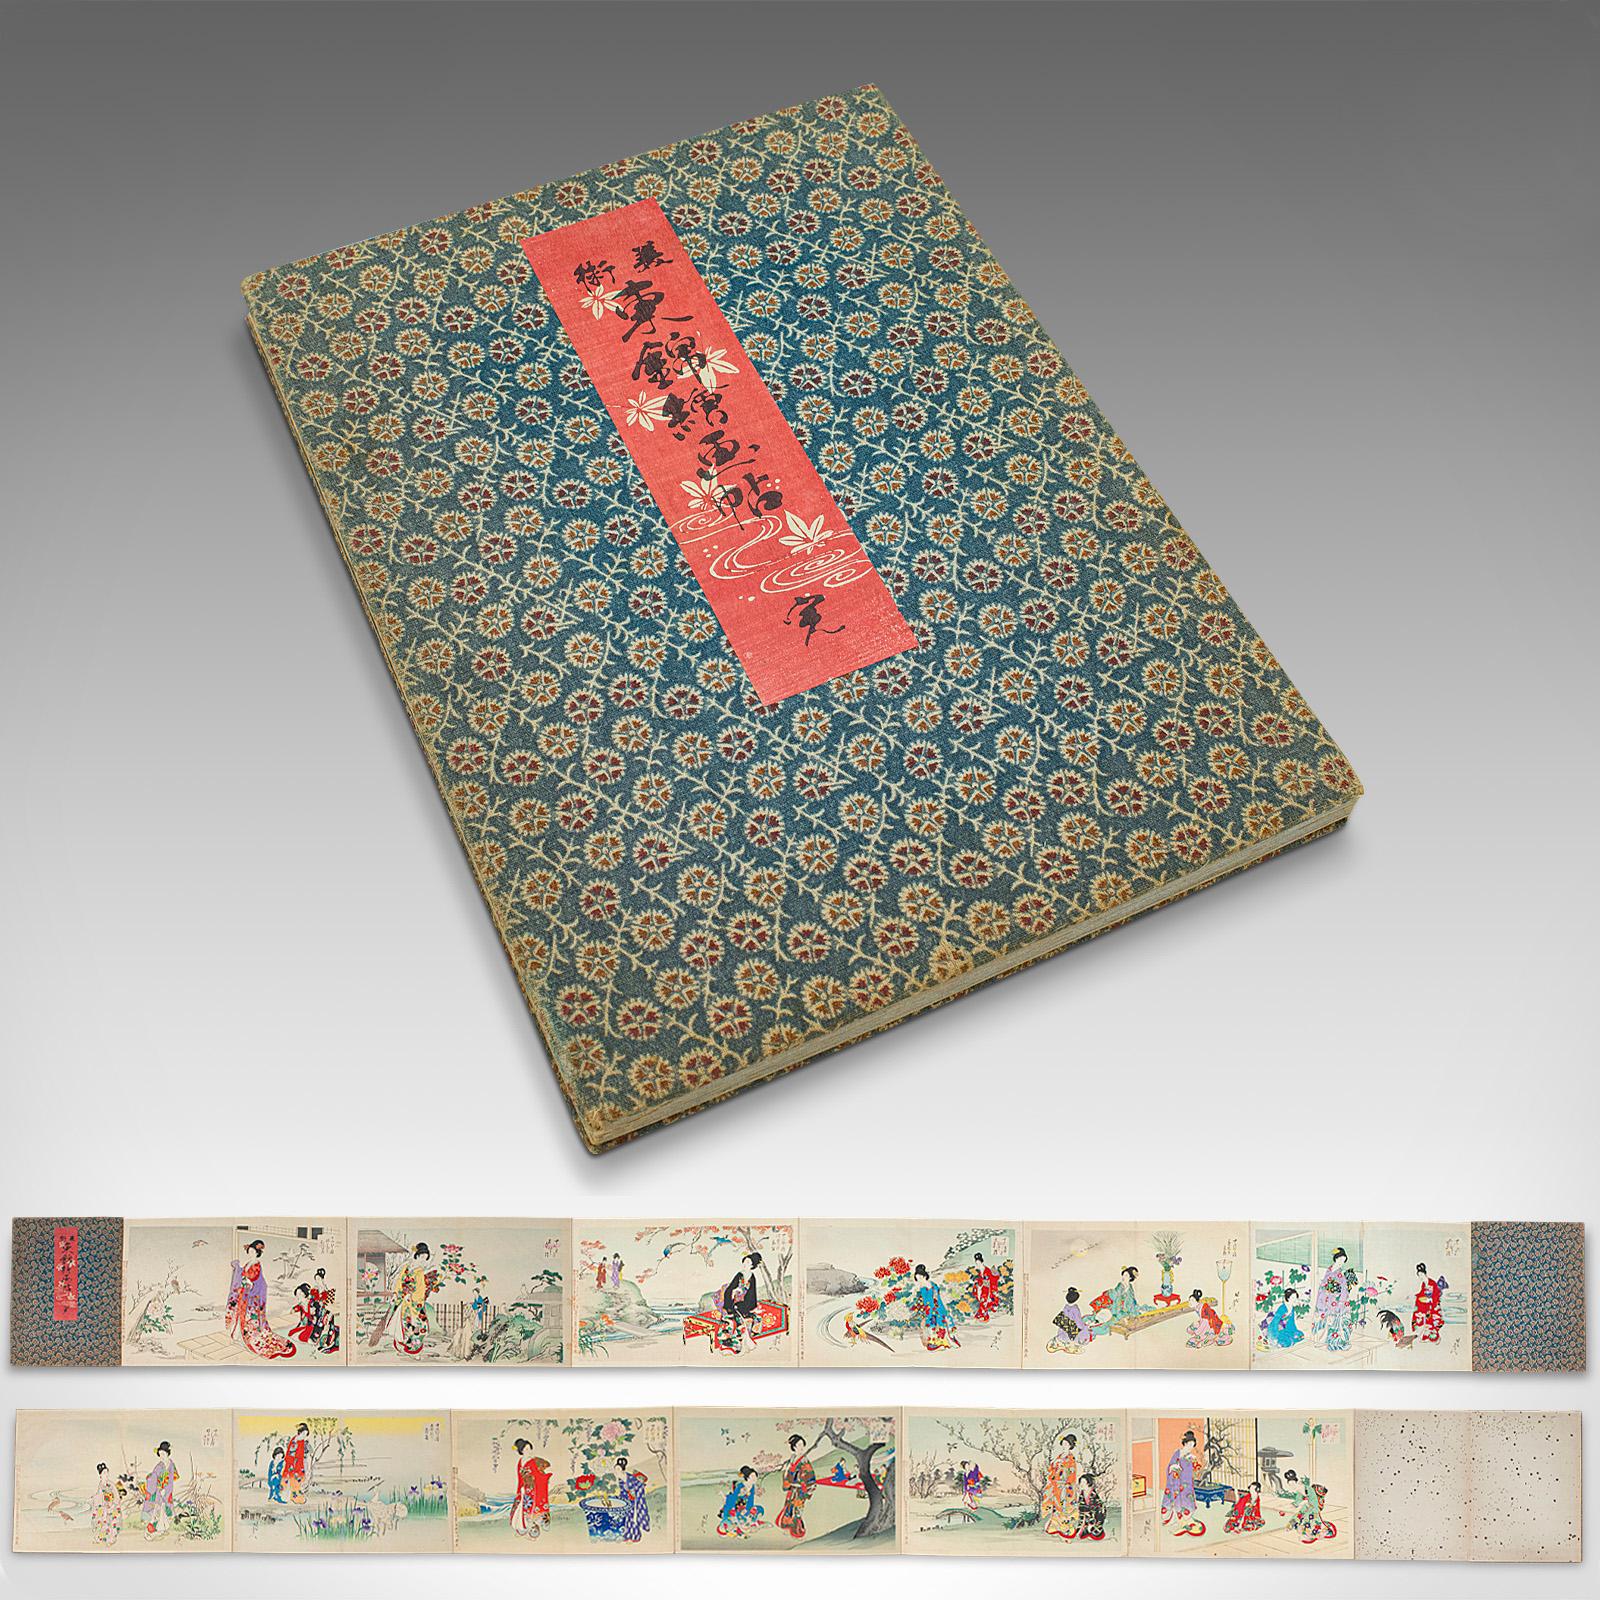 This is an antique fold-out illustrated book. A Japanese, woodblock print on linen concertina collection of full-colour scenes, dating to the Meiji period, circa 1900.

Striking when fully extended, with an abundance of fine detail to both